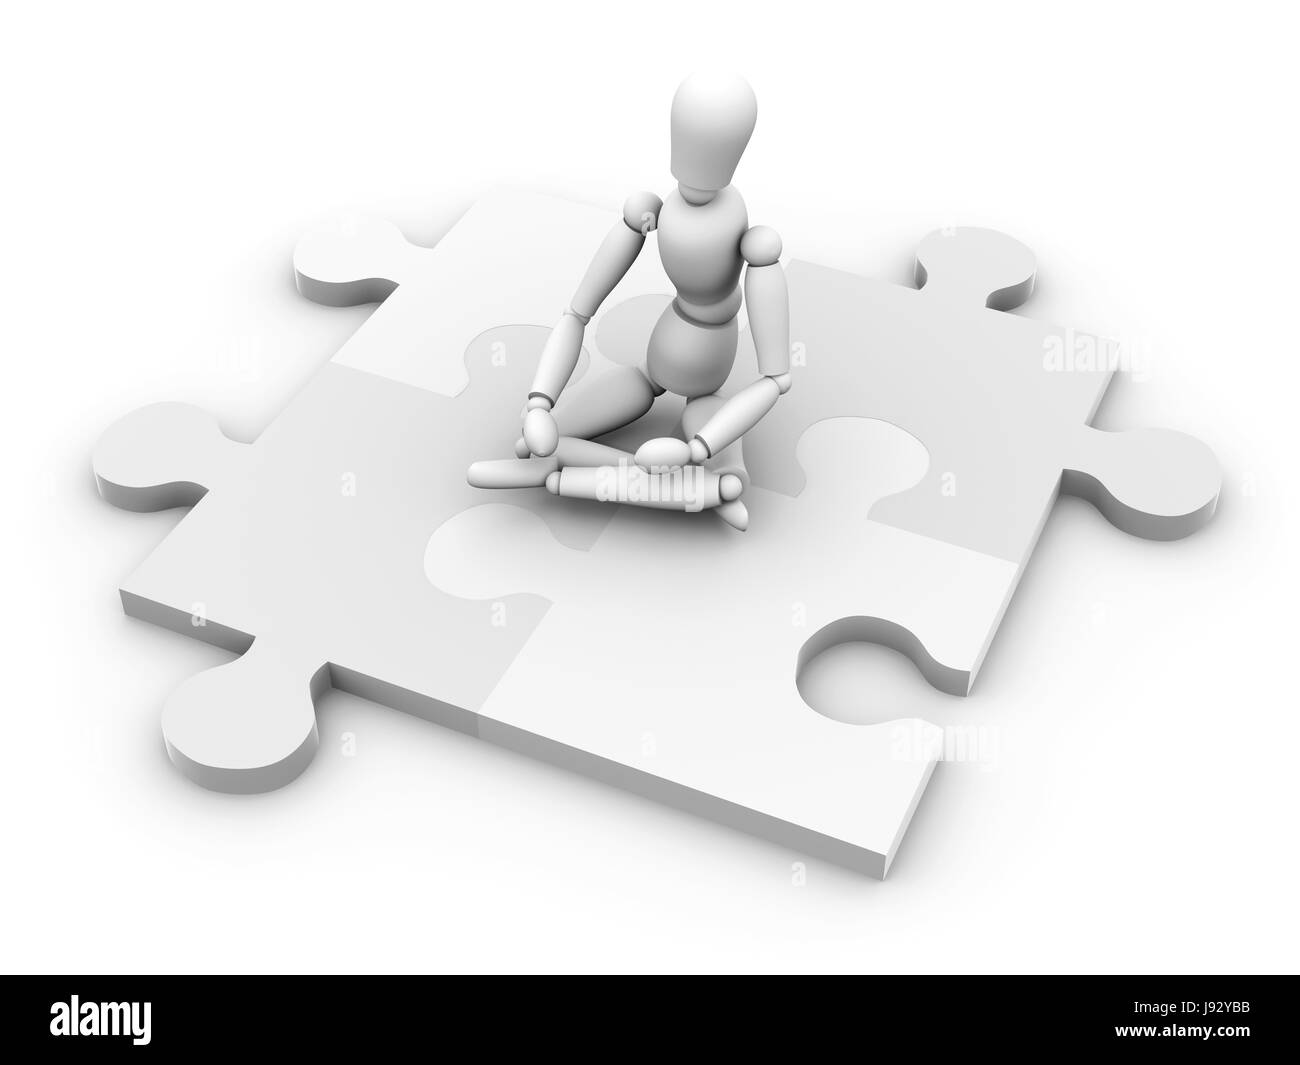 strategy, spare time, free time, leisure, leisure time, game, tournament, play, Stock Photo